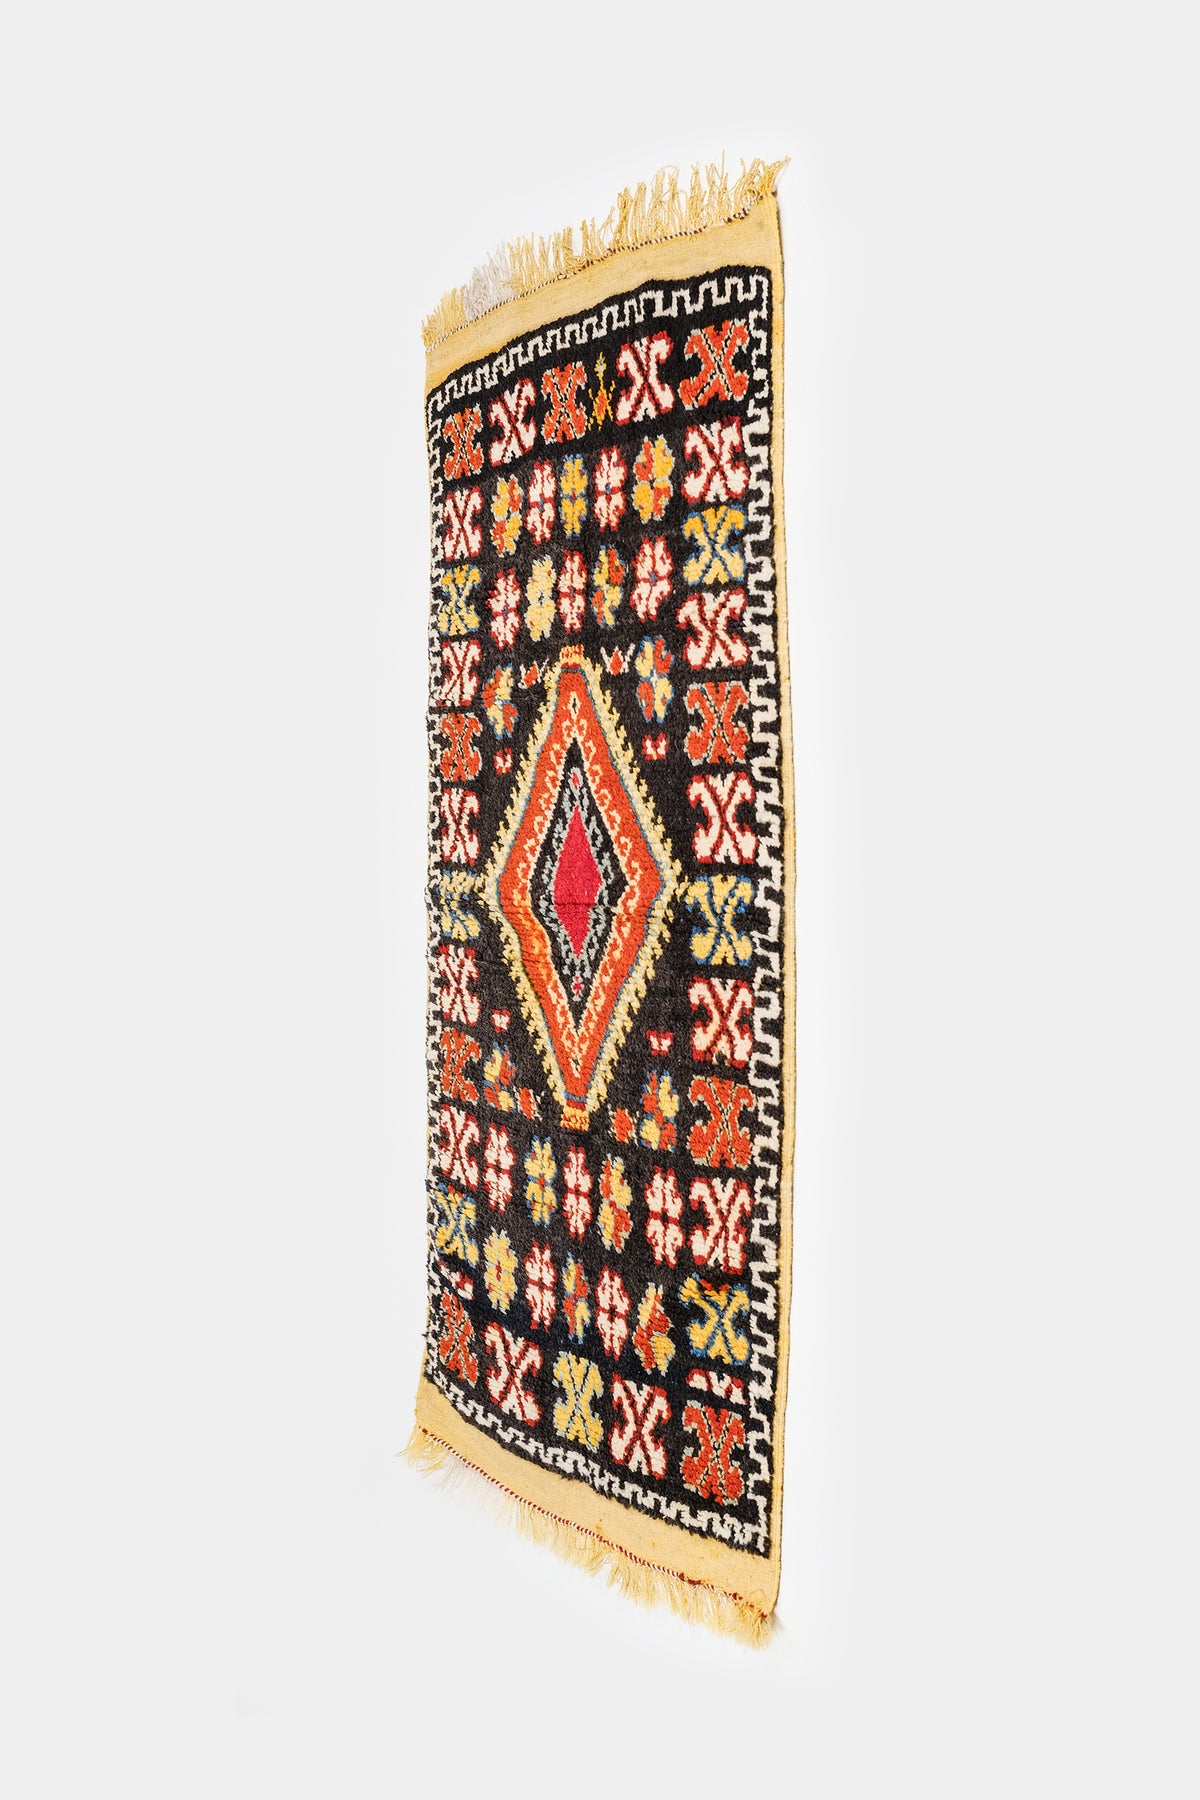 Moroccan barber carpet from the Atlas 40s